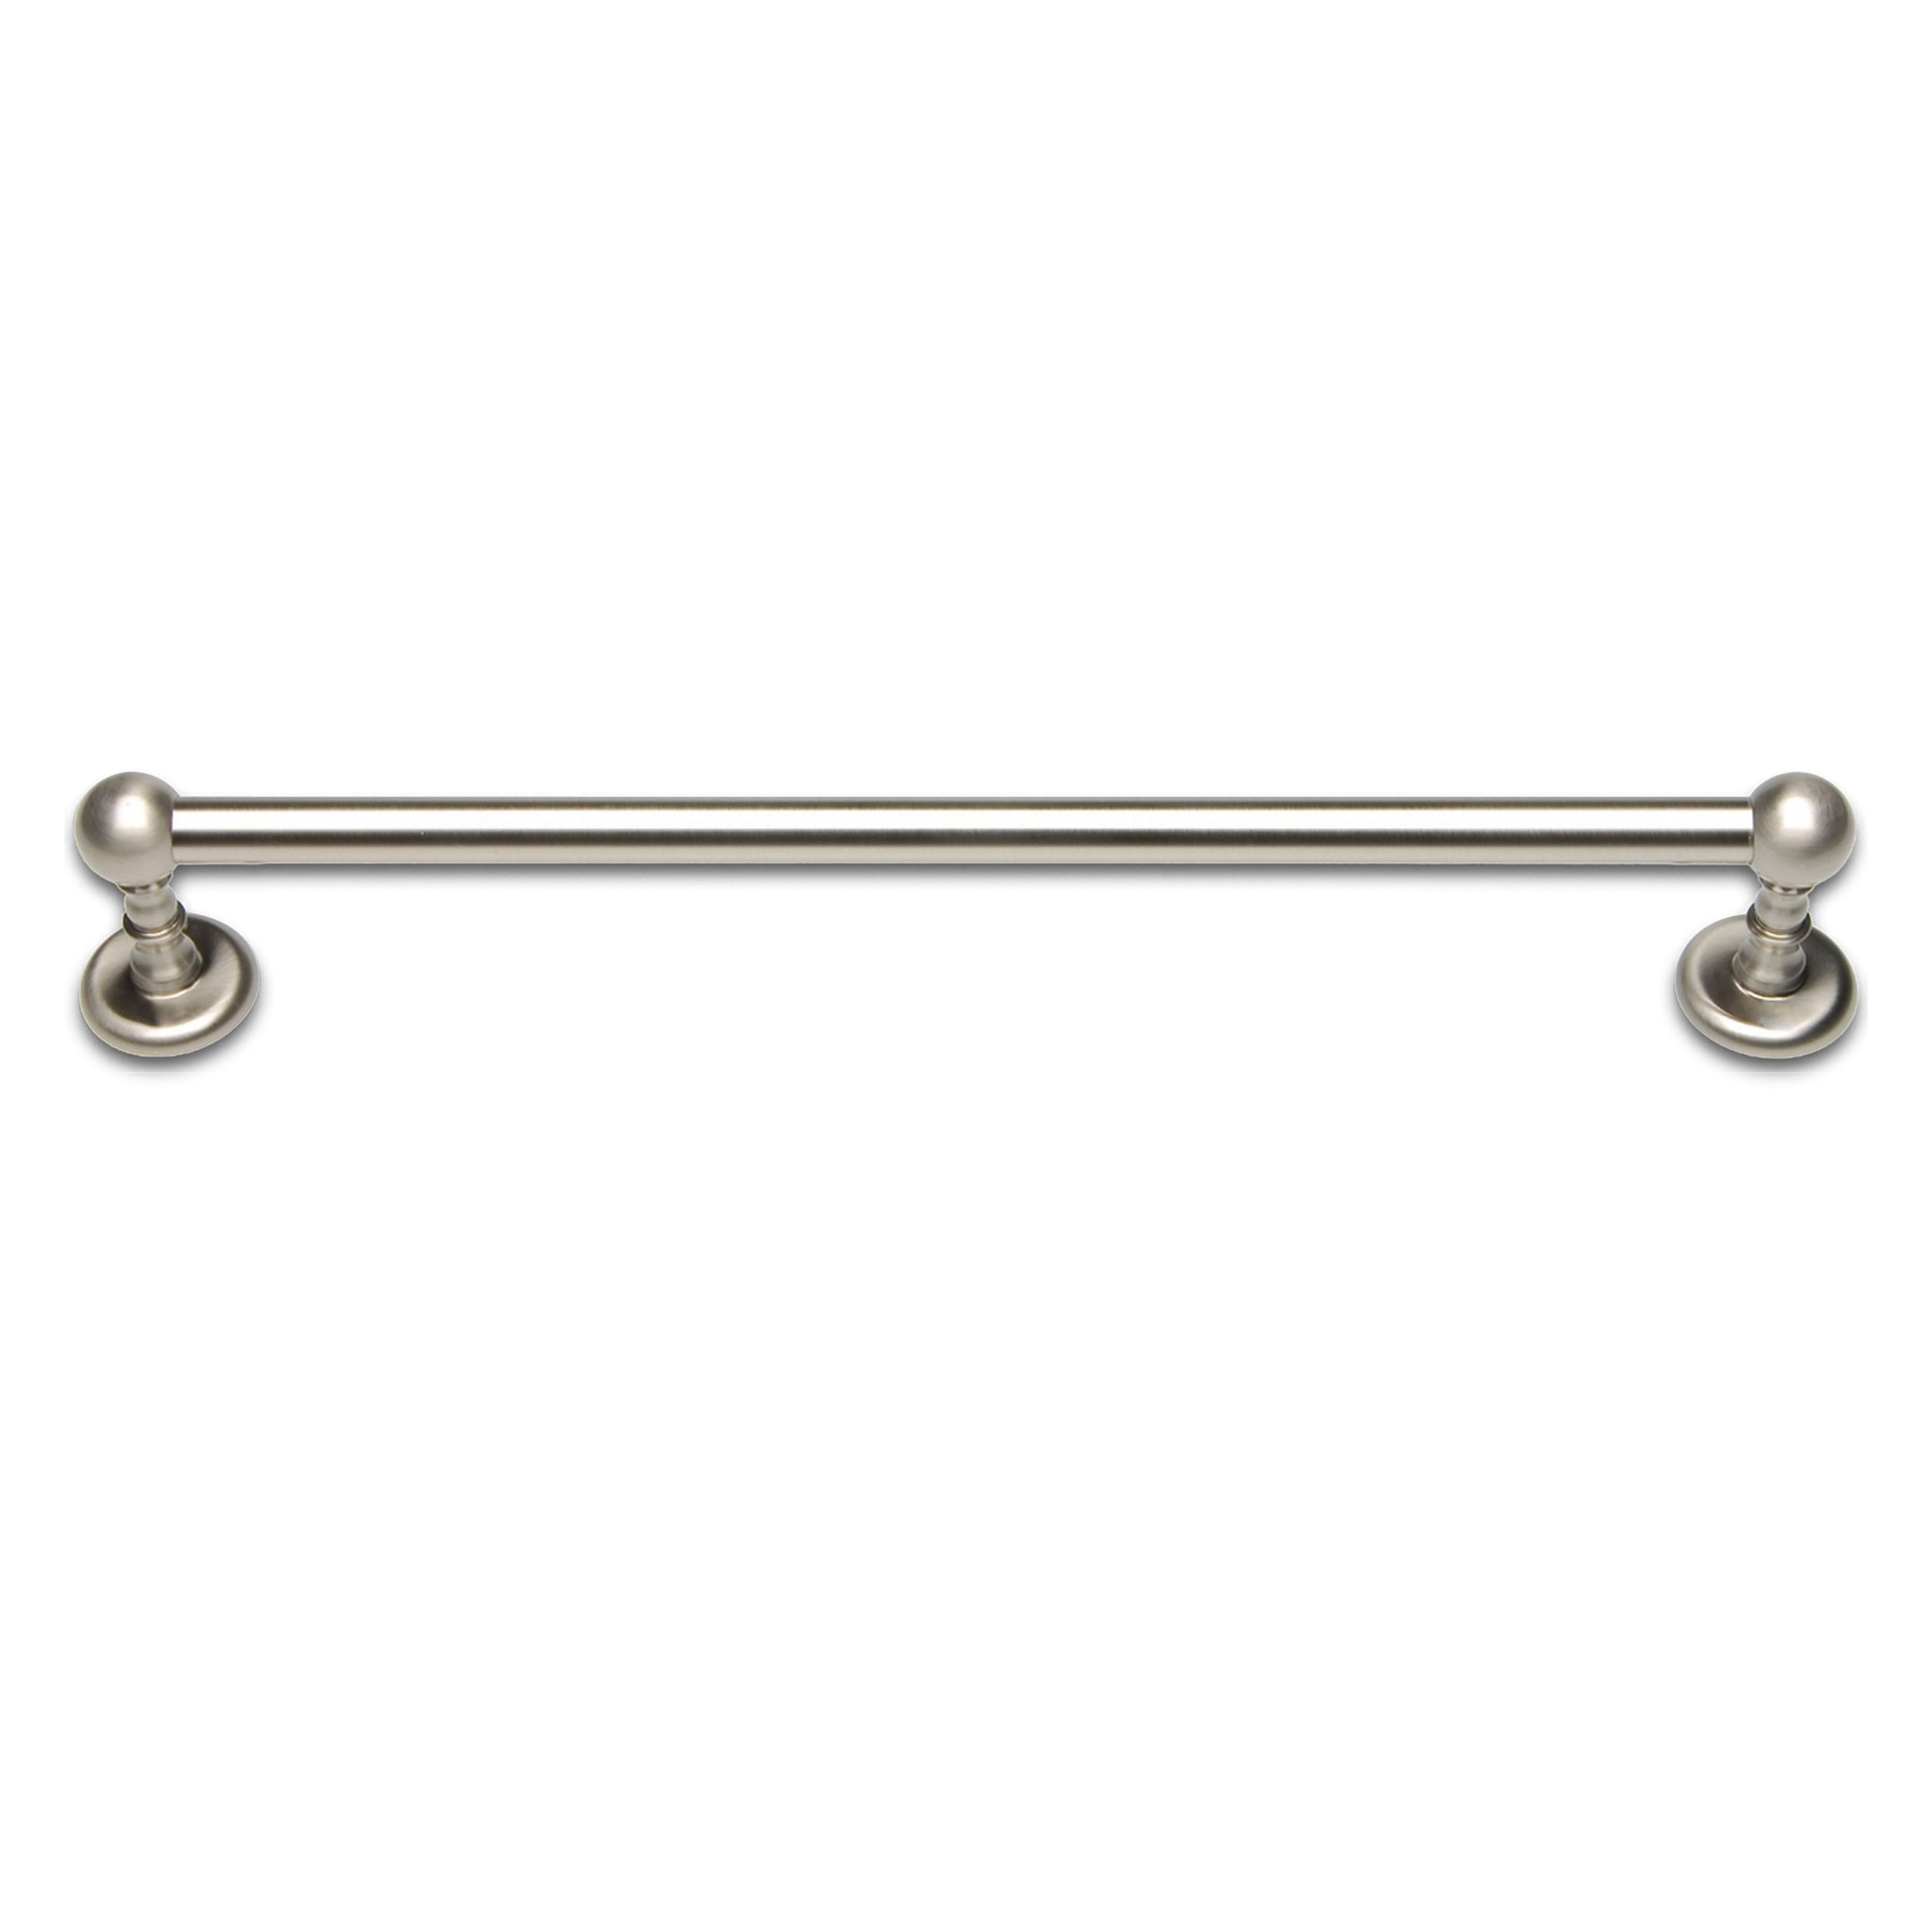 Traditional and elegant towel bar in a polished nickel finish.